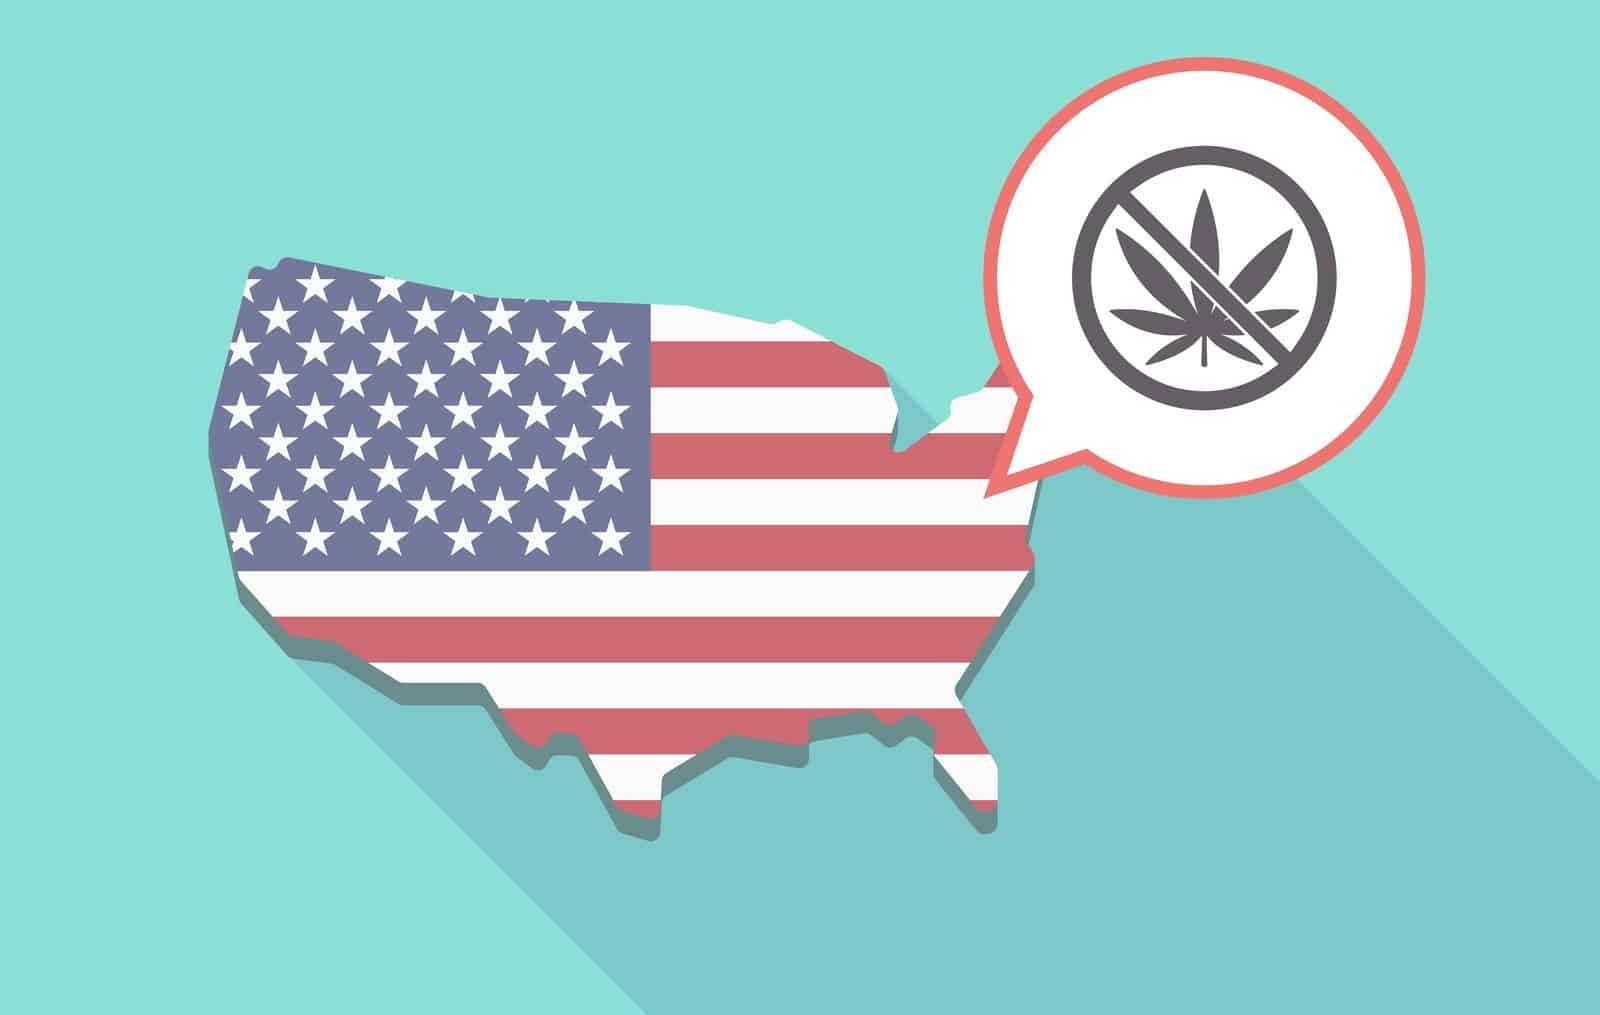 A History of Marijuana Prohibition at the Federal Level